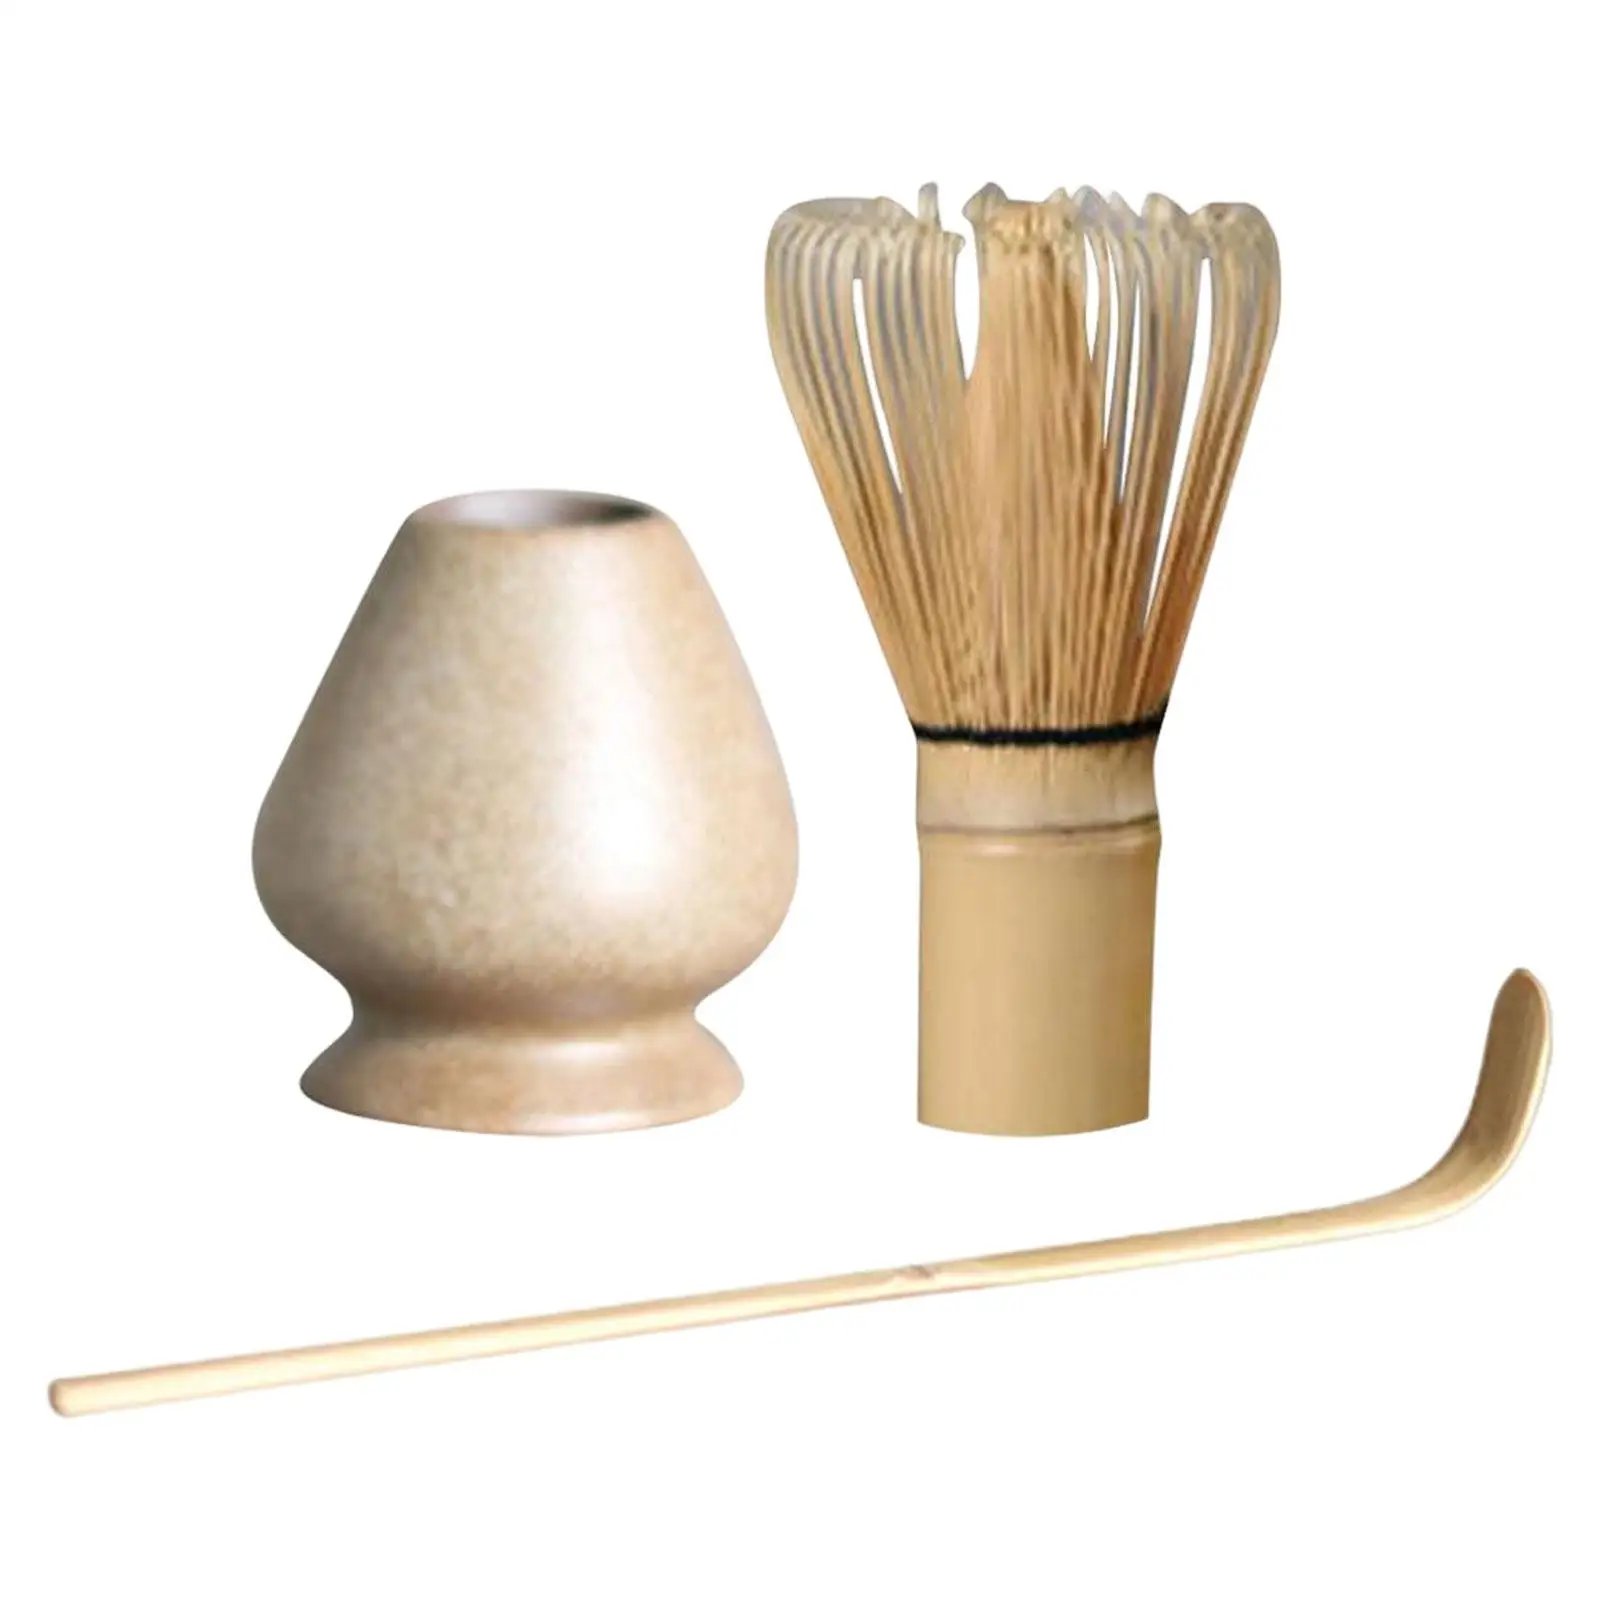 Traditional Japanese Matcha Ceremony Set Tea Making Tools for Matcha Ceremony Holiday Gifts